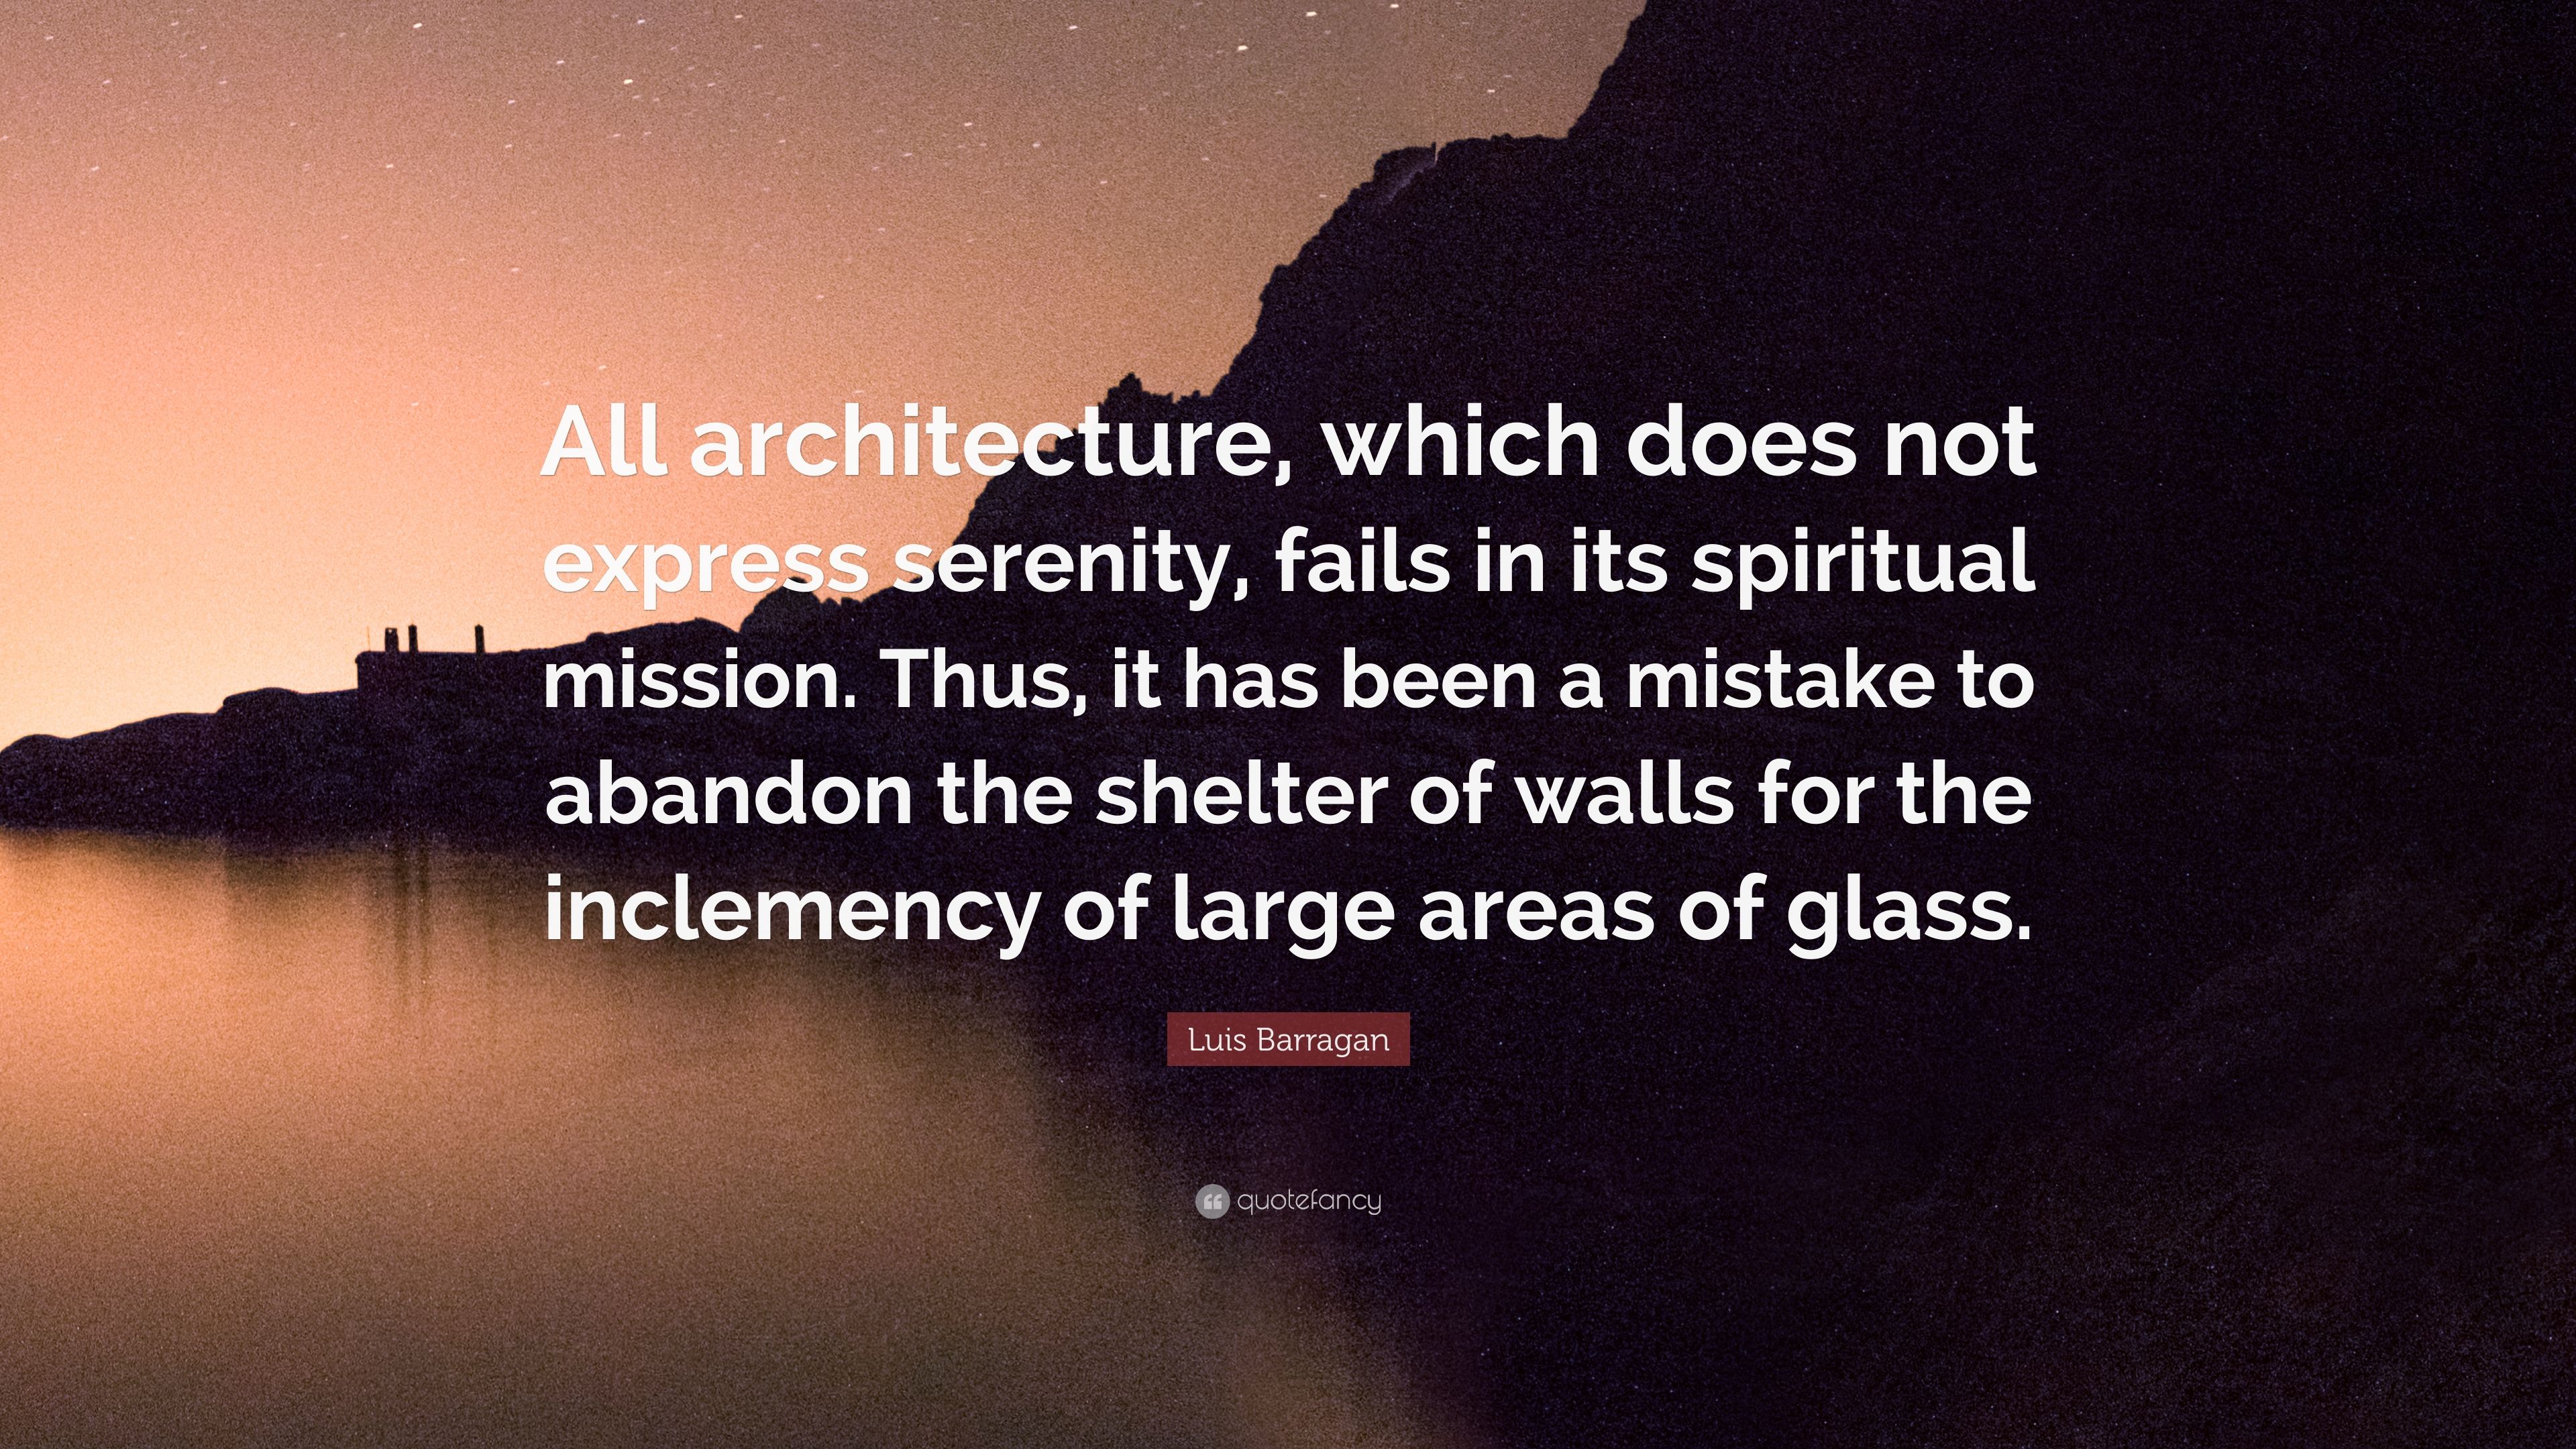 Luis Barragan Quote: “All architecture, which does not